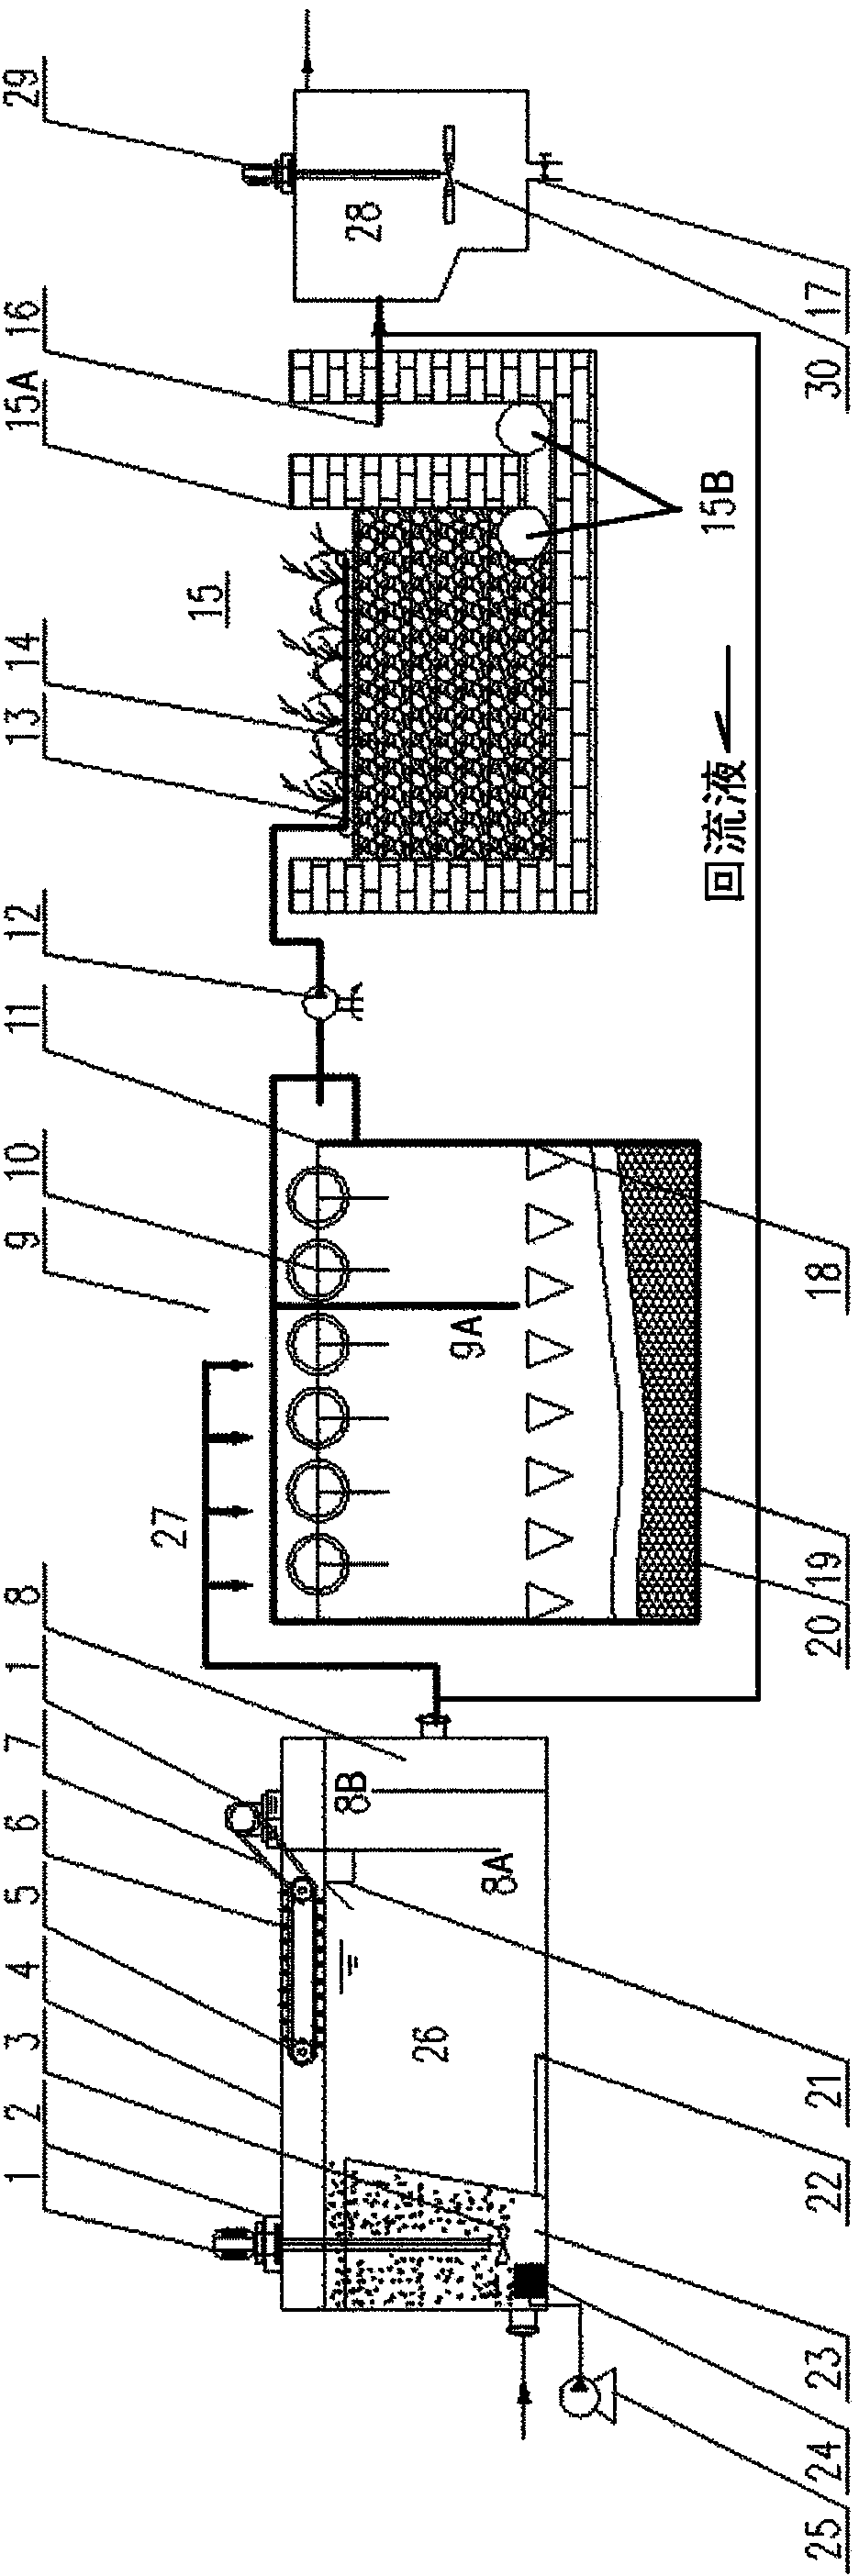 Vertical subsurface flow constructed wetland sewage purification device and method